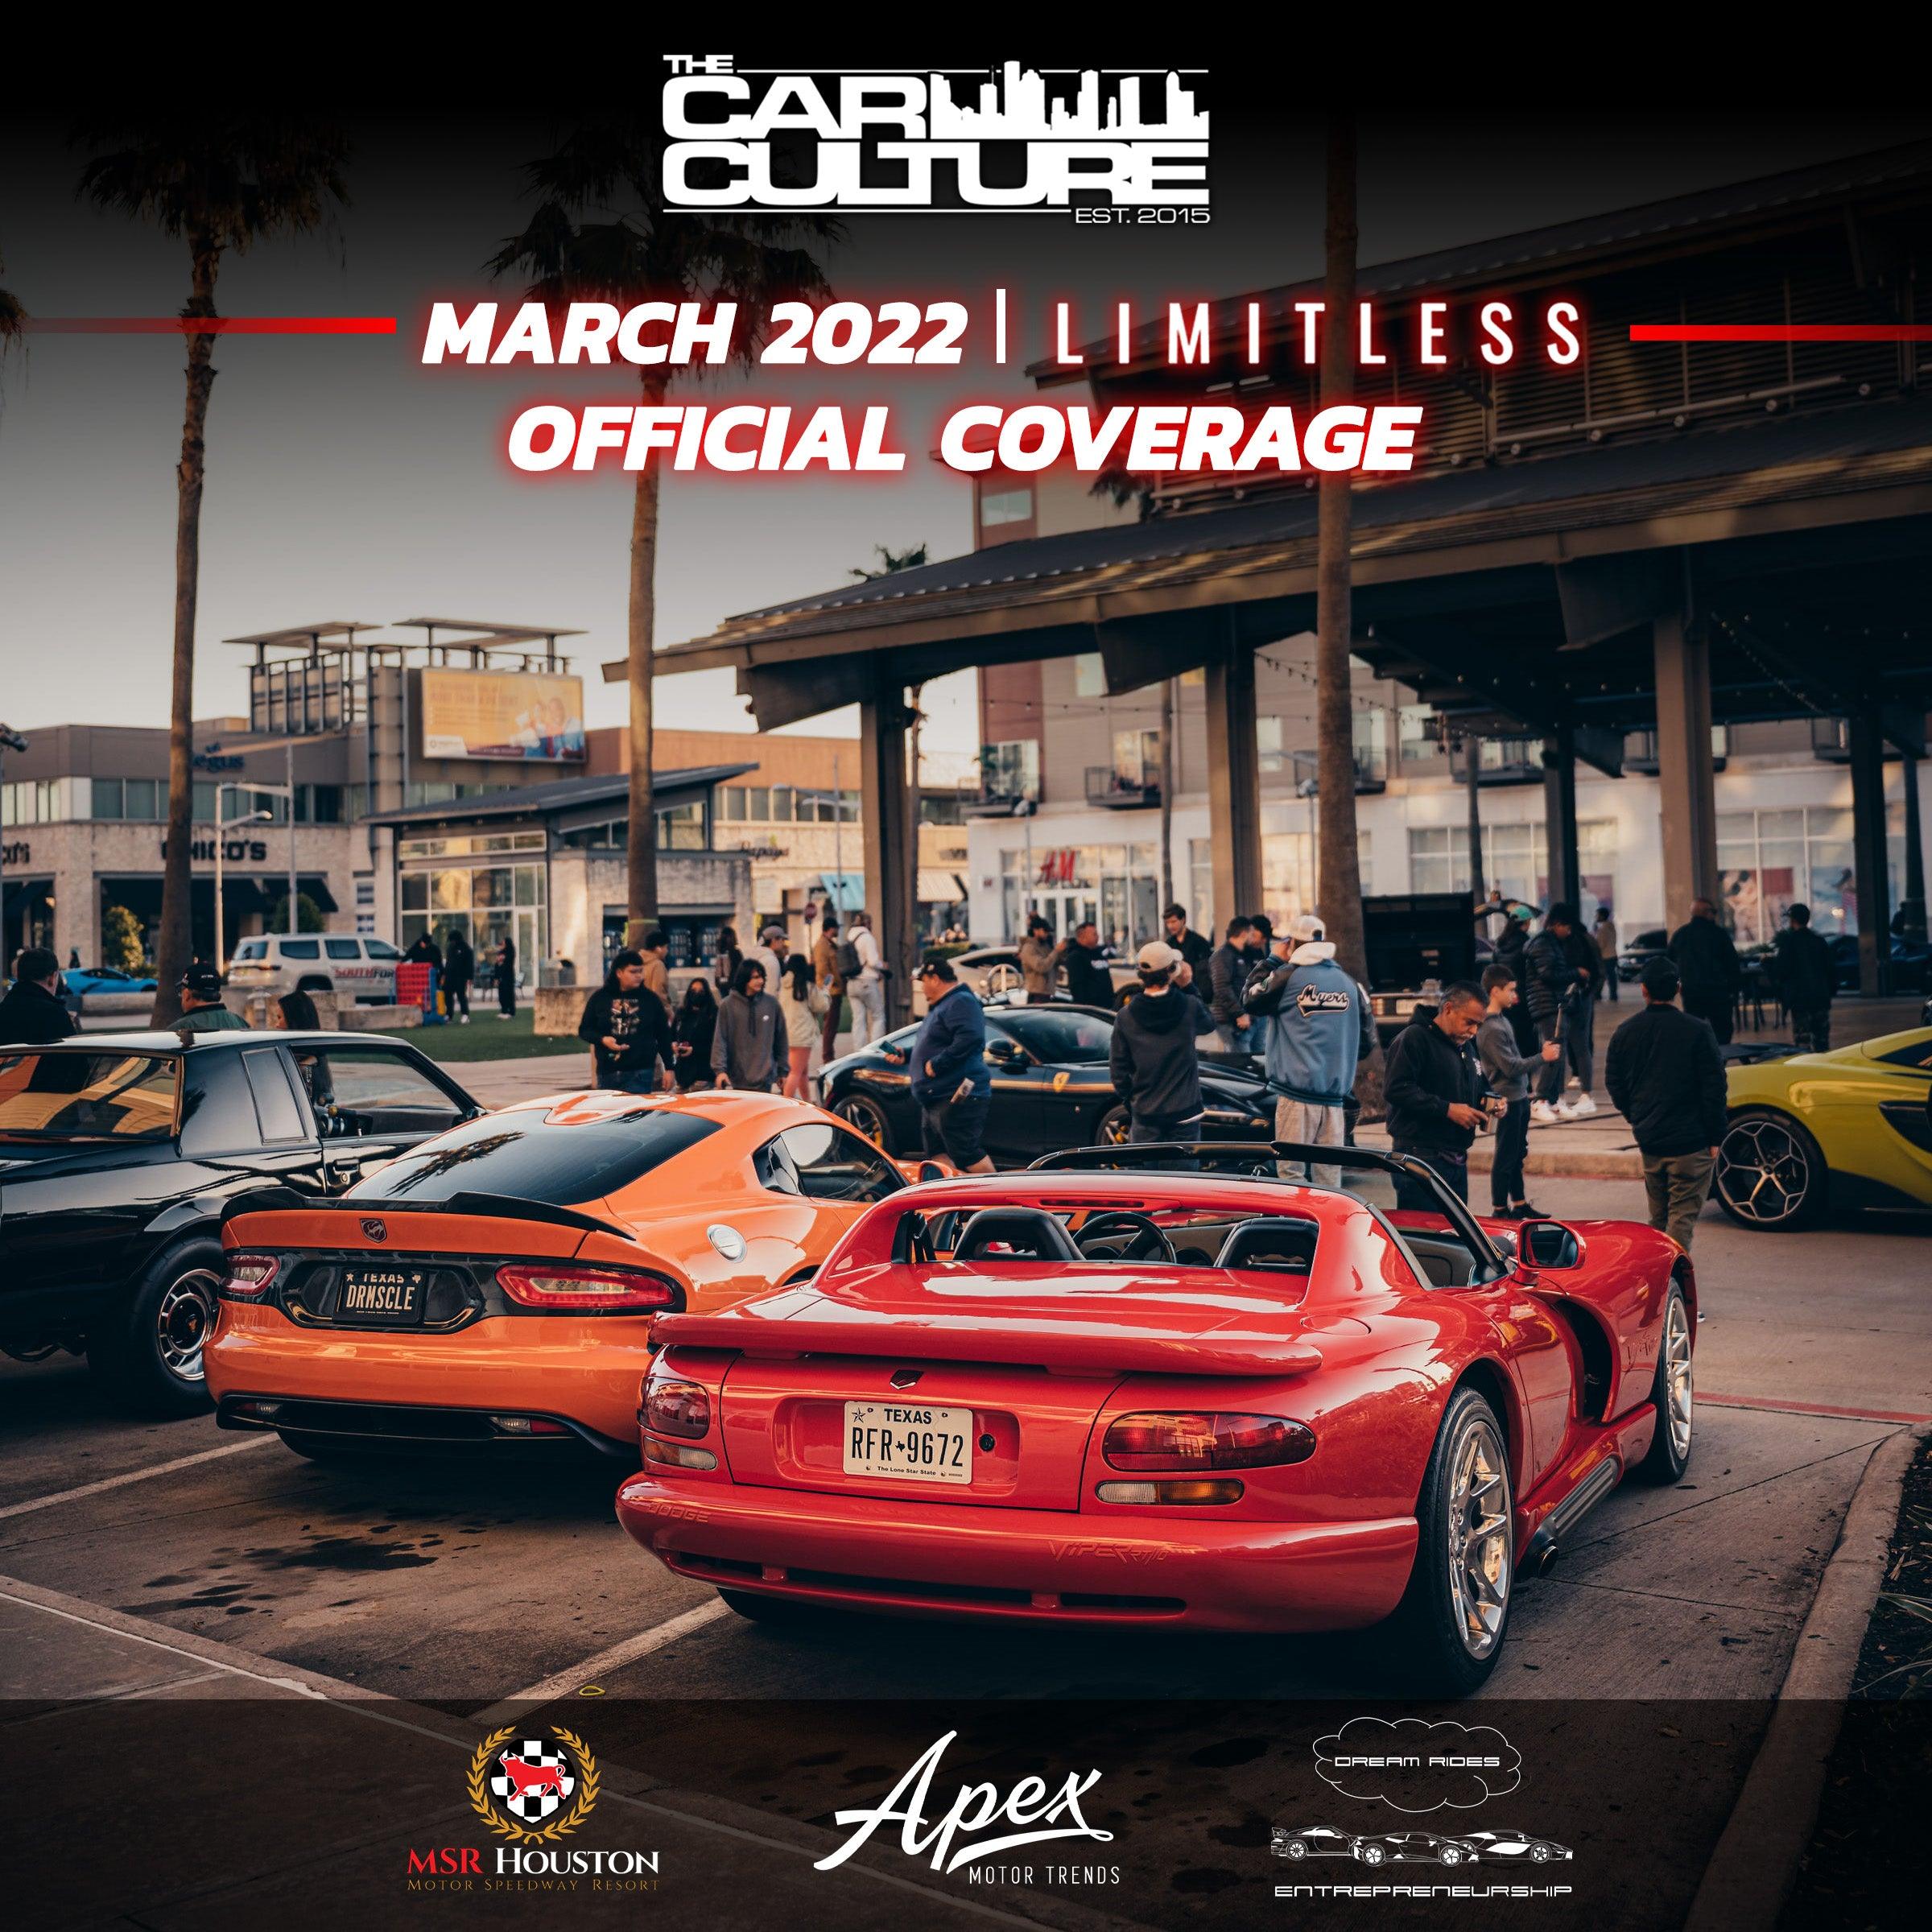 Houston Car Meets Limitless March 2022